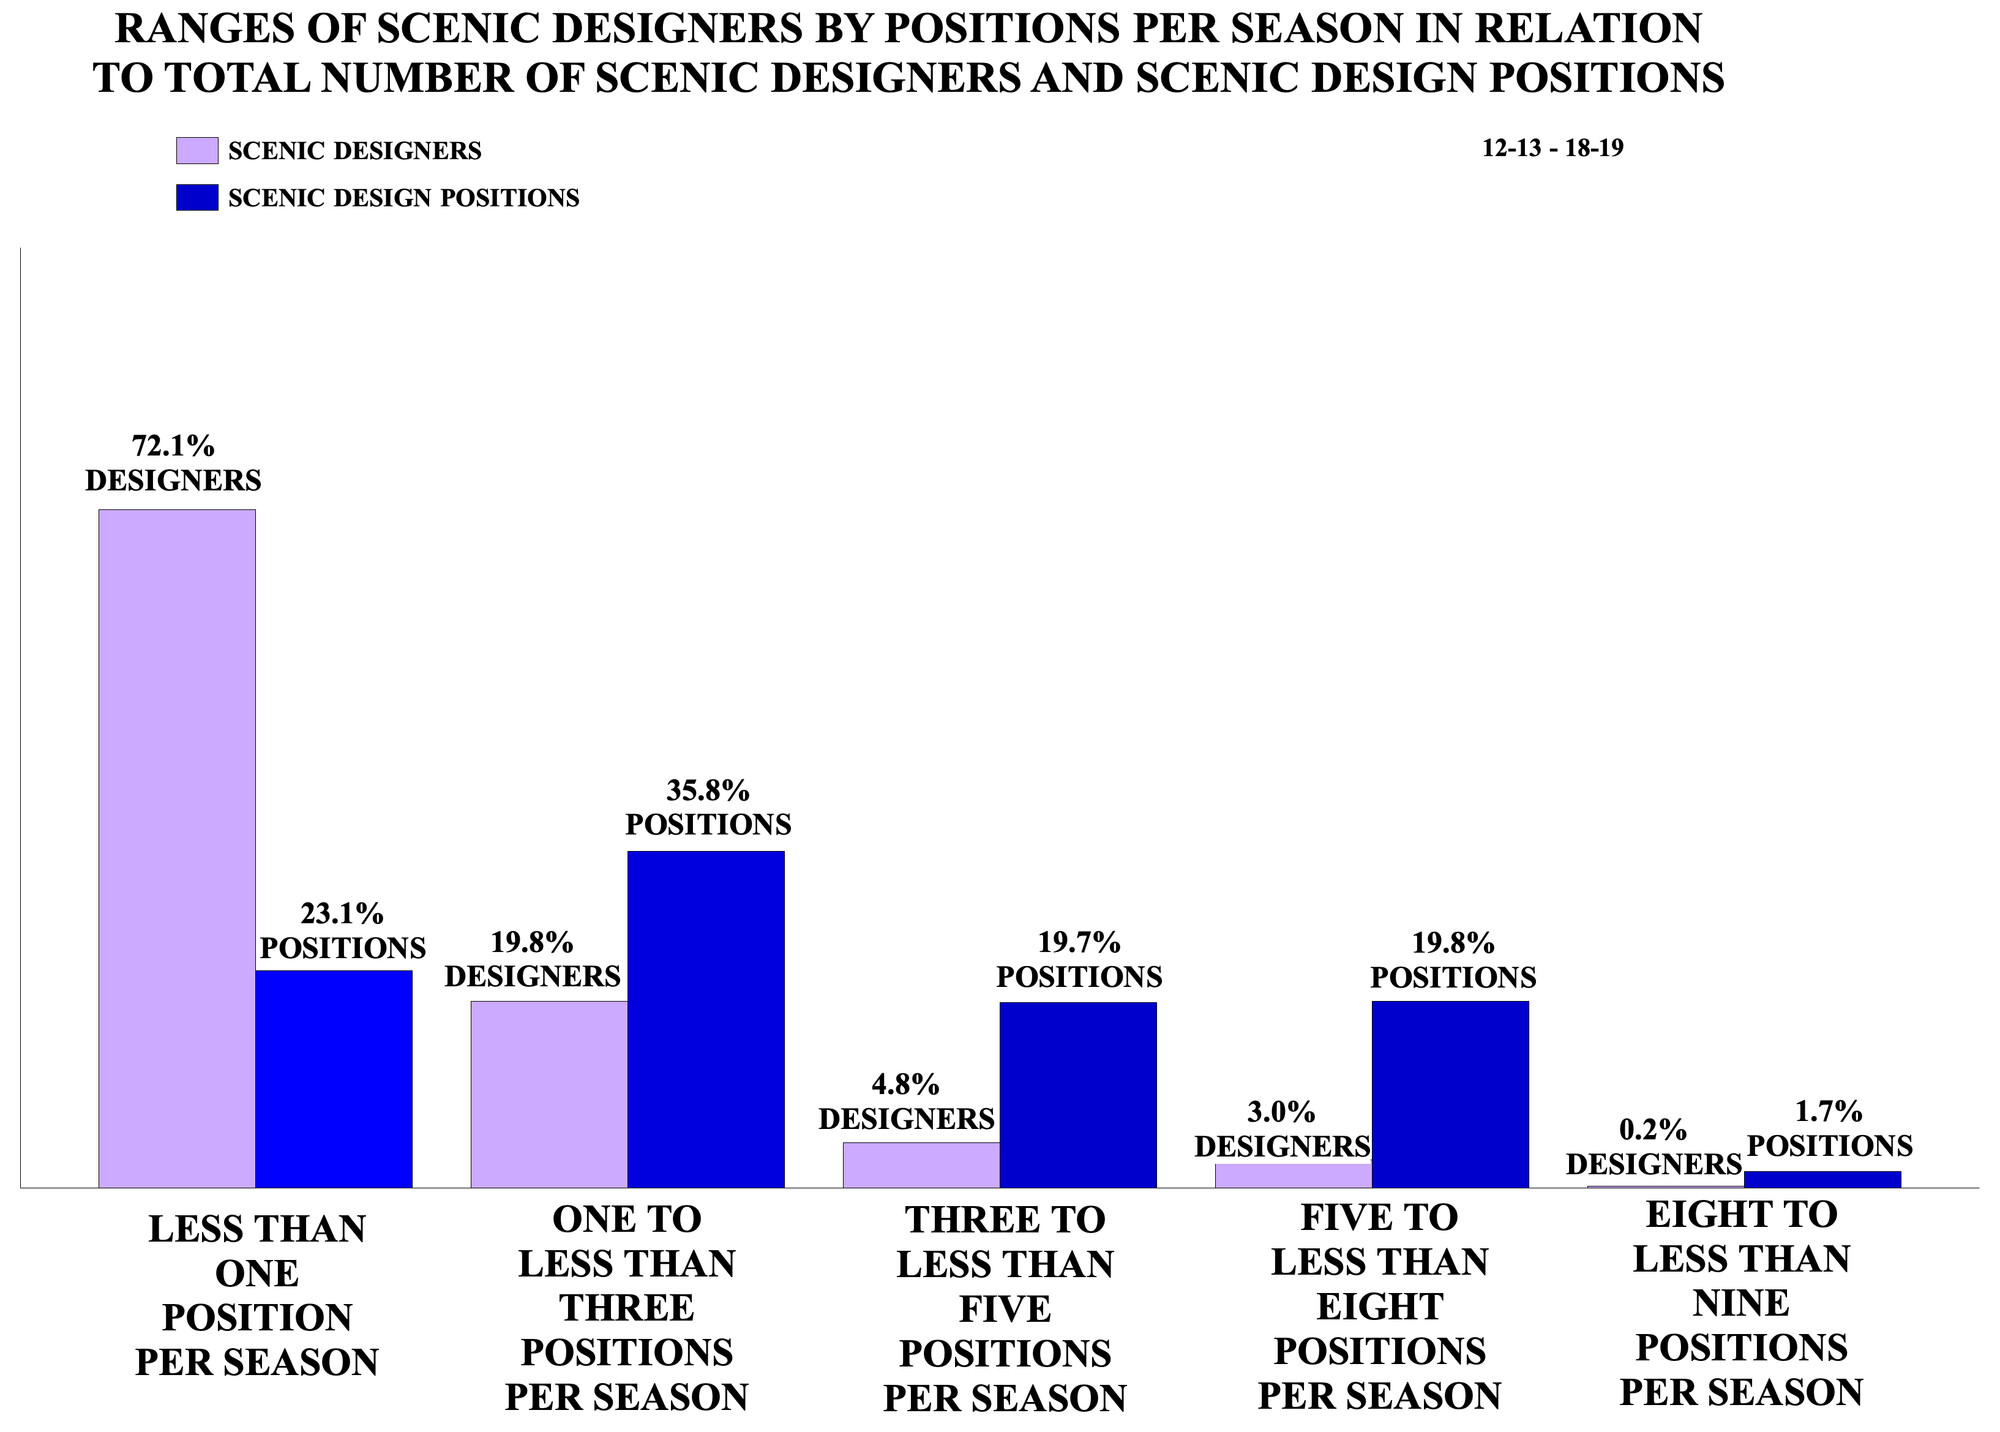 Ranges of Scenic Designers by Positions Per Season in Relation to Total Number of Scenic Designers and Scenic Design Positions